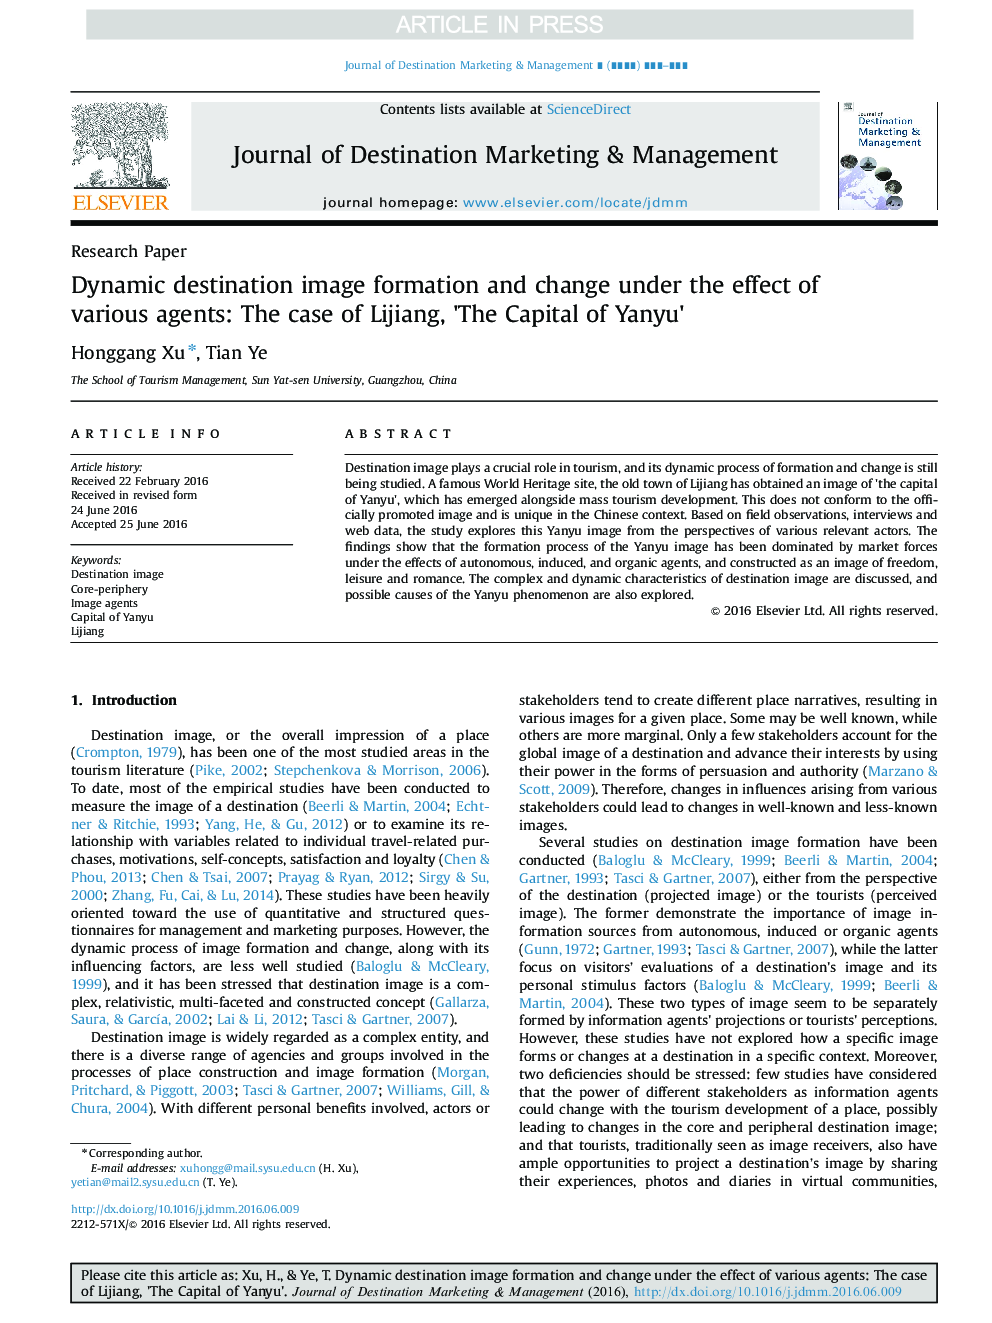 Dynamic destination image formation and change under the effect of various agents: The case of Lijiang, 'The Capital of Yanyu'